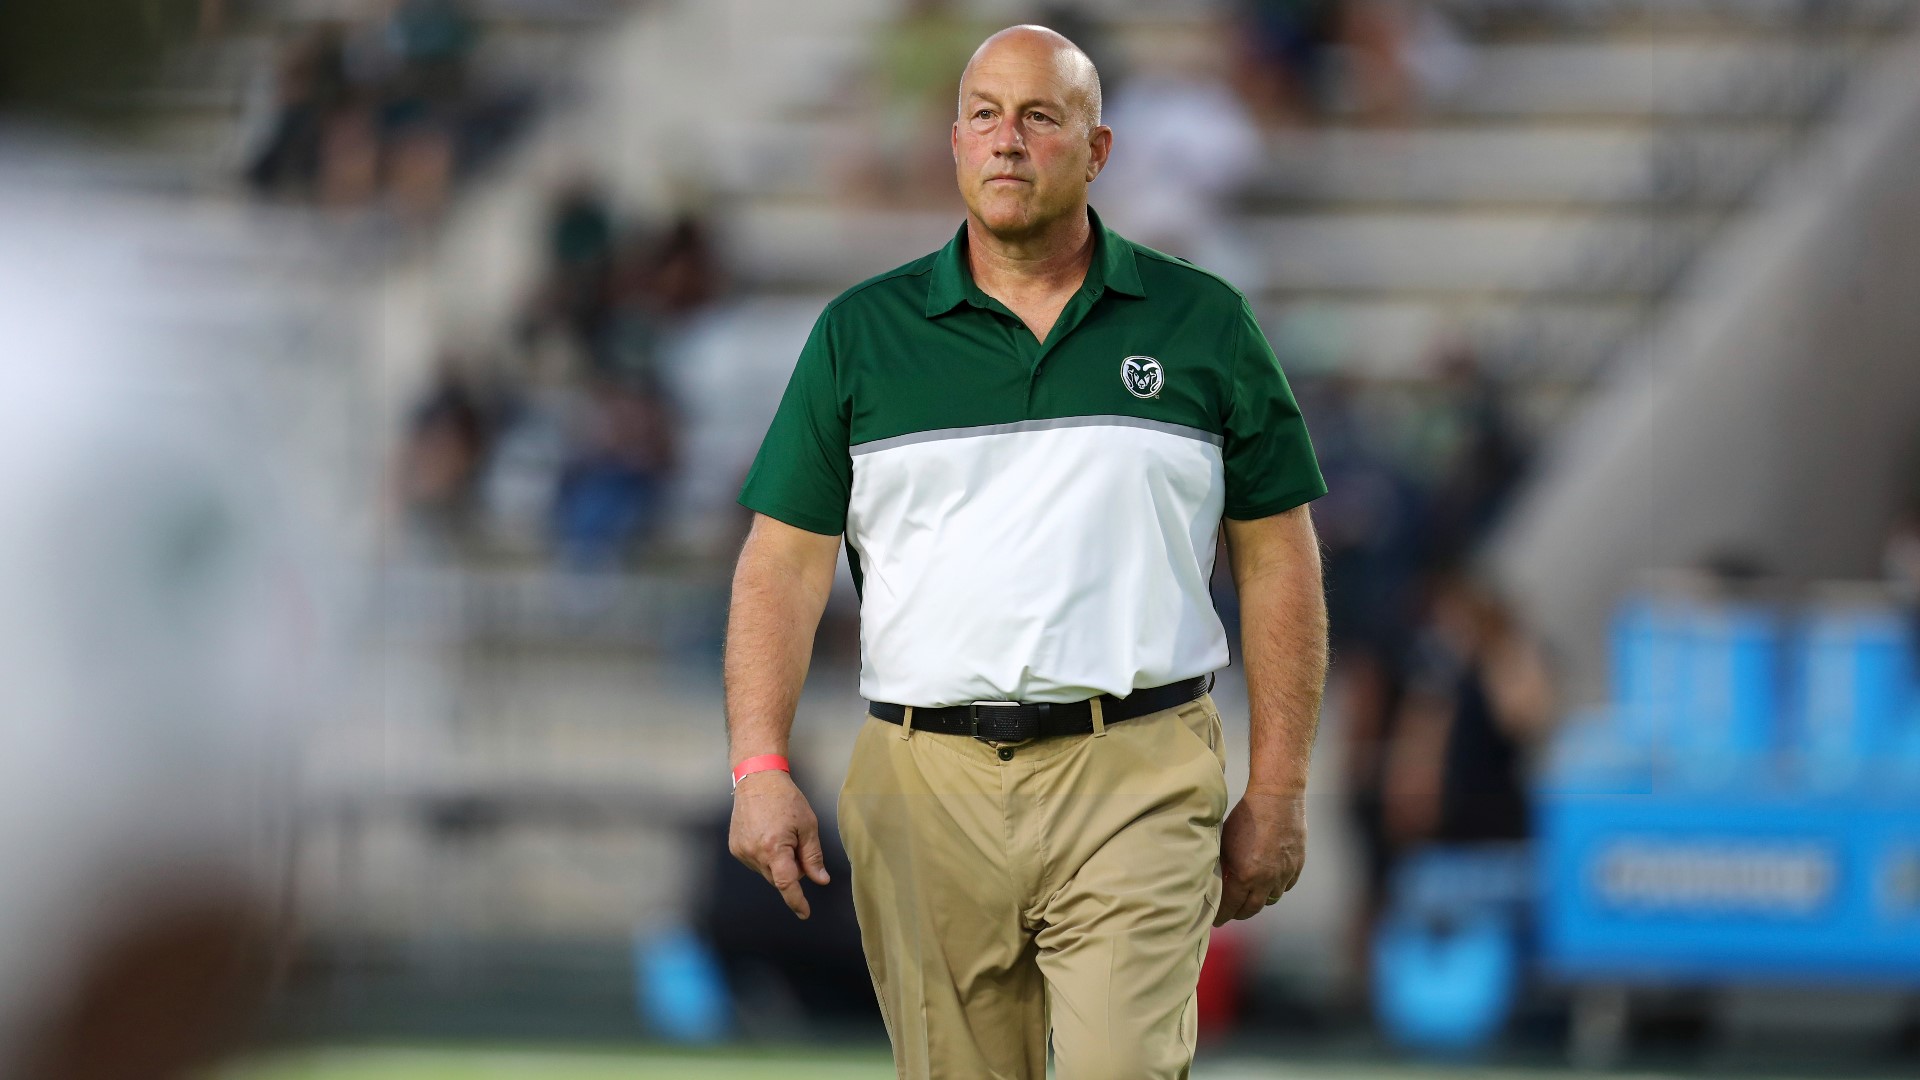 Steve Addazio led the Rams to a 3-9 overall record in 2021.